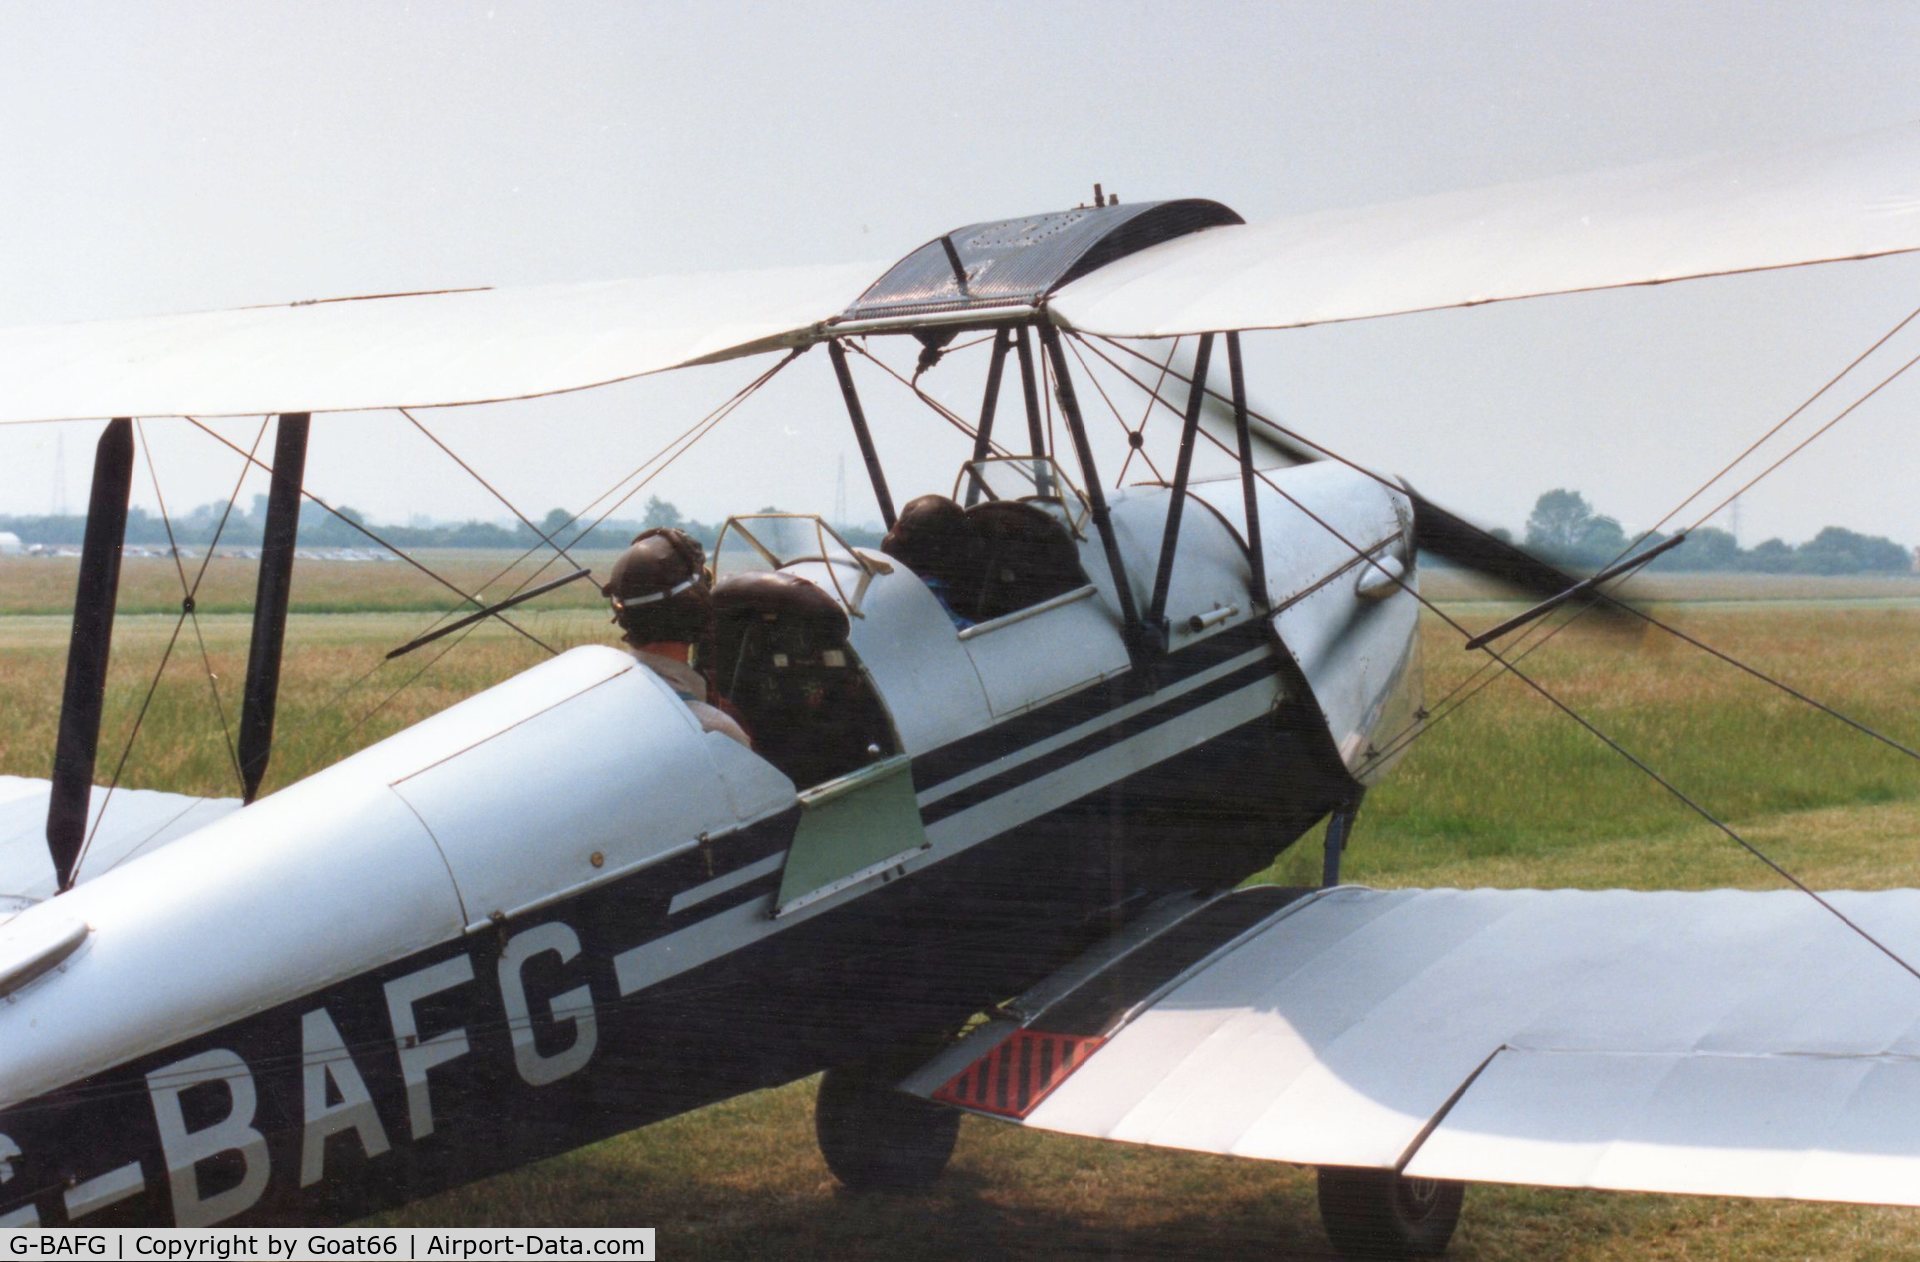 G-BAFG, 1943 De Havilland DH-82A Tiger Moth II C/N 85995, In 1980's livery, when owned and flown by father / son Jim and Peter Shaw, both Captains with British Midland